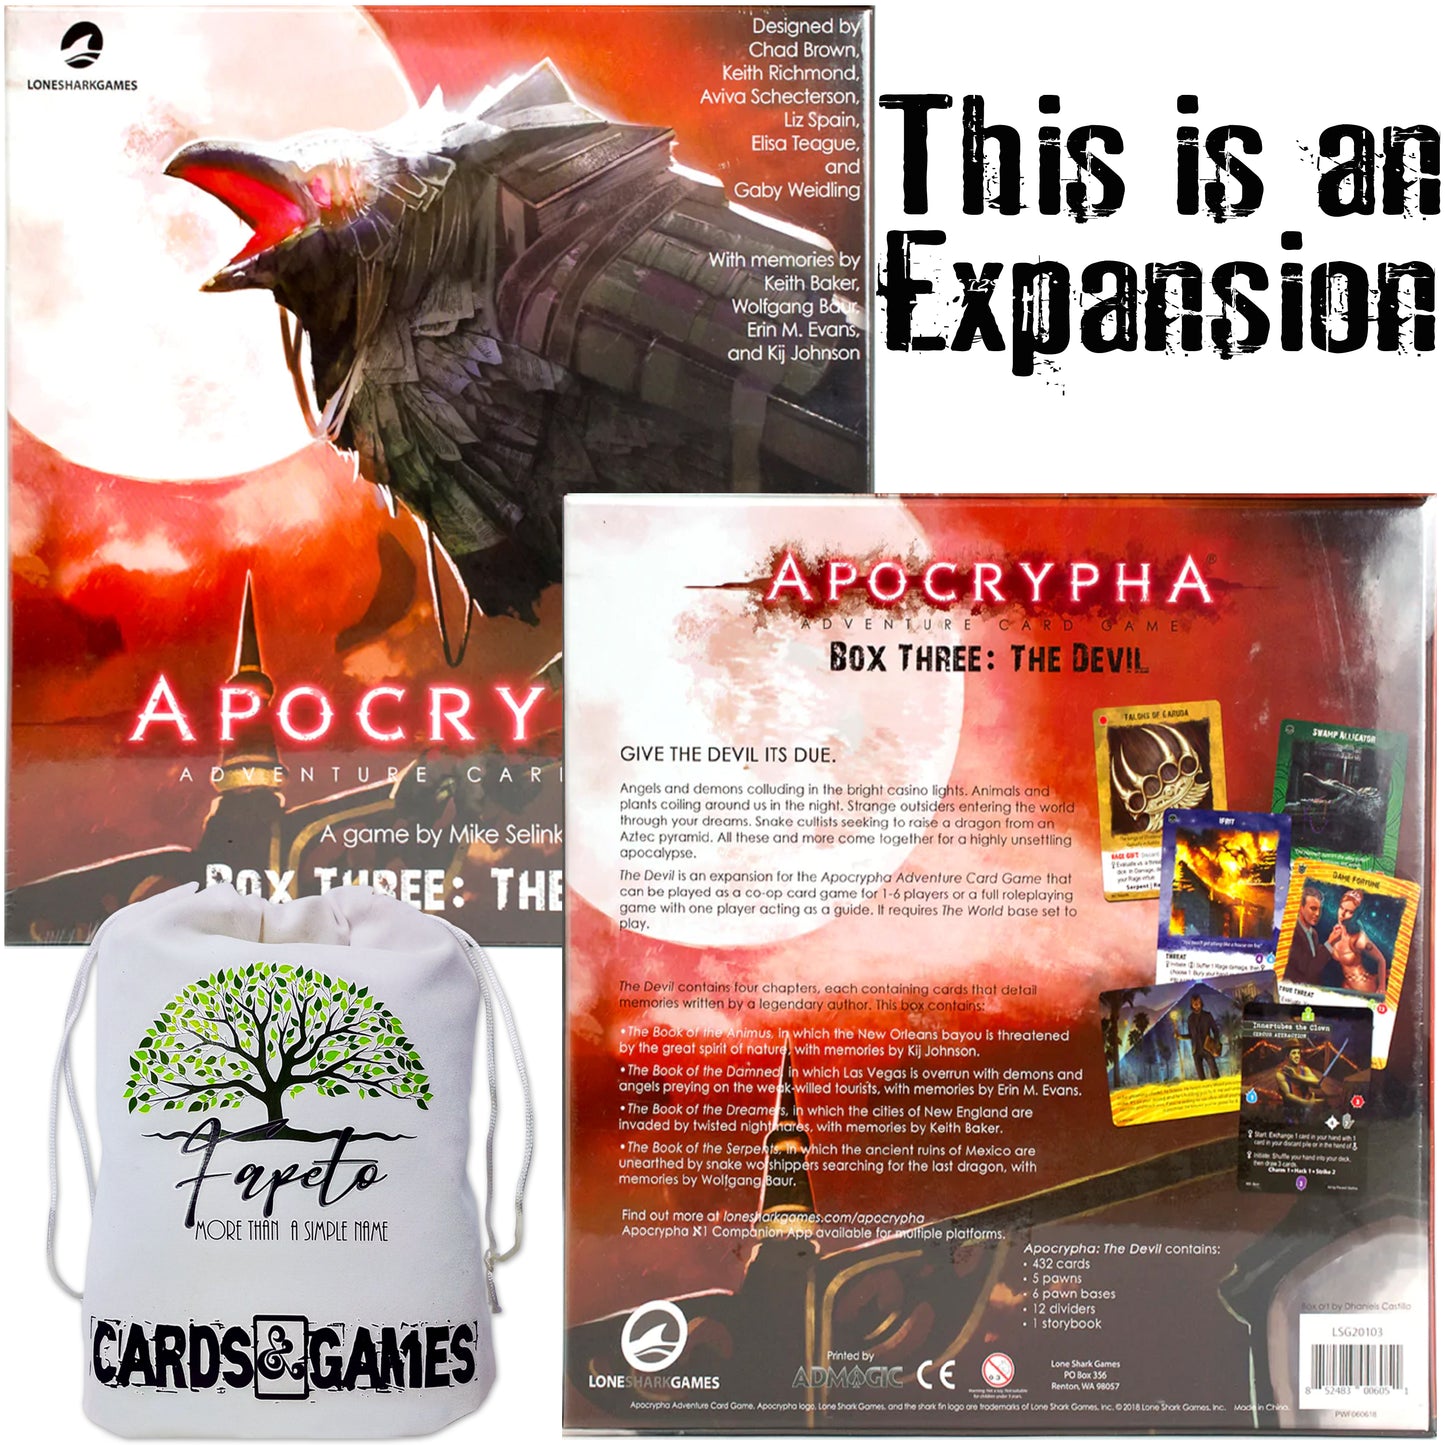 Apocrypha Adventure Card Game: Box One, Two and Tree (The World, The Flesh and The Devil) bundle with bonus chapter The Book of the Hybrids and Random Color Drawstring Bag for small pcs storage